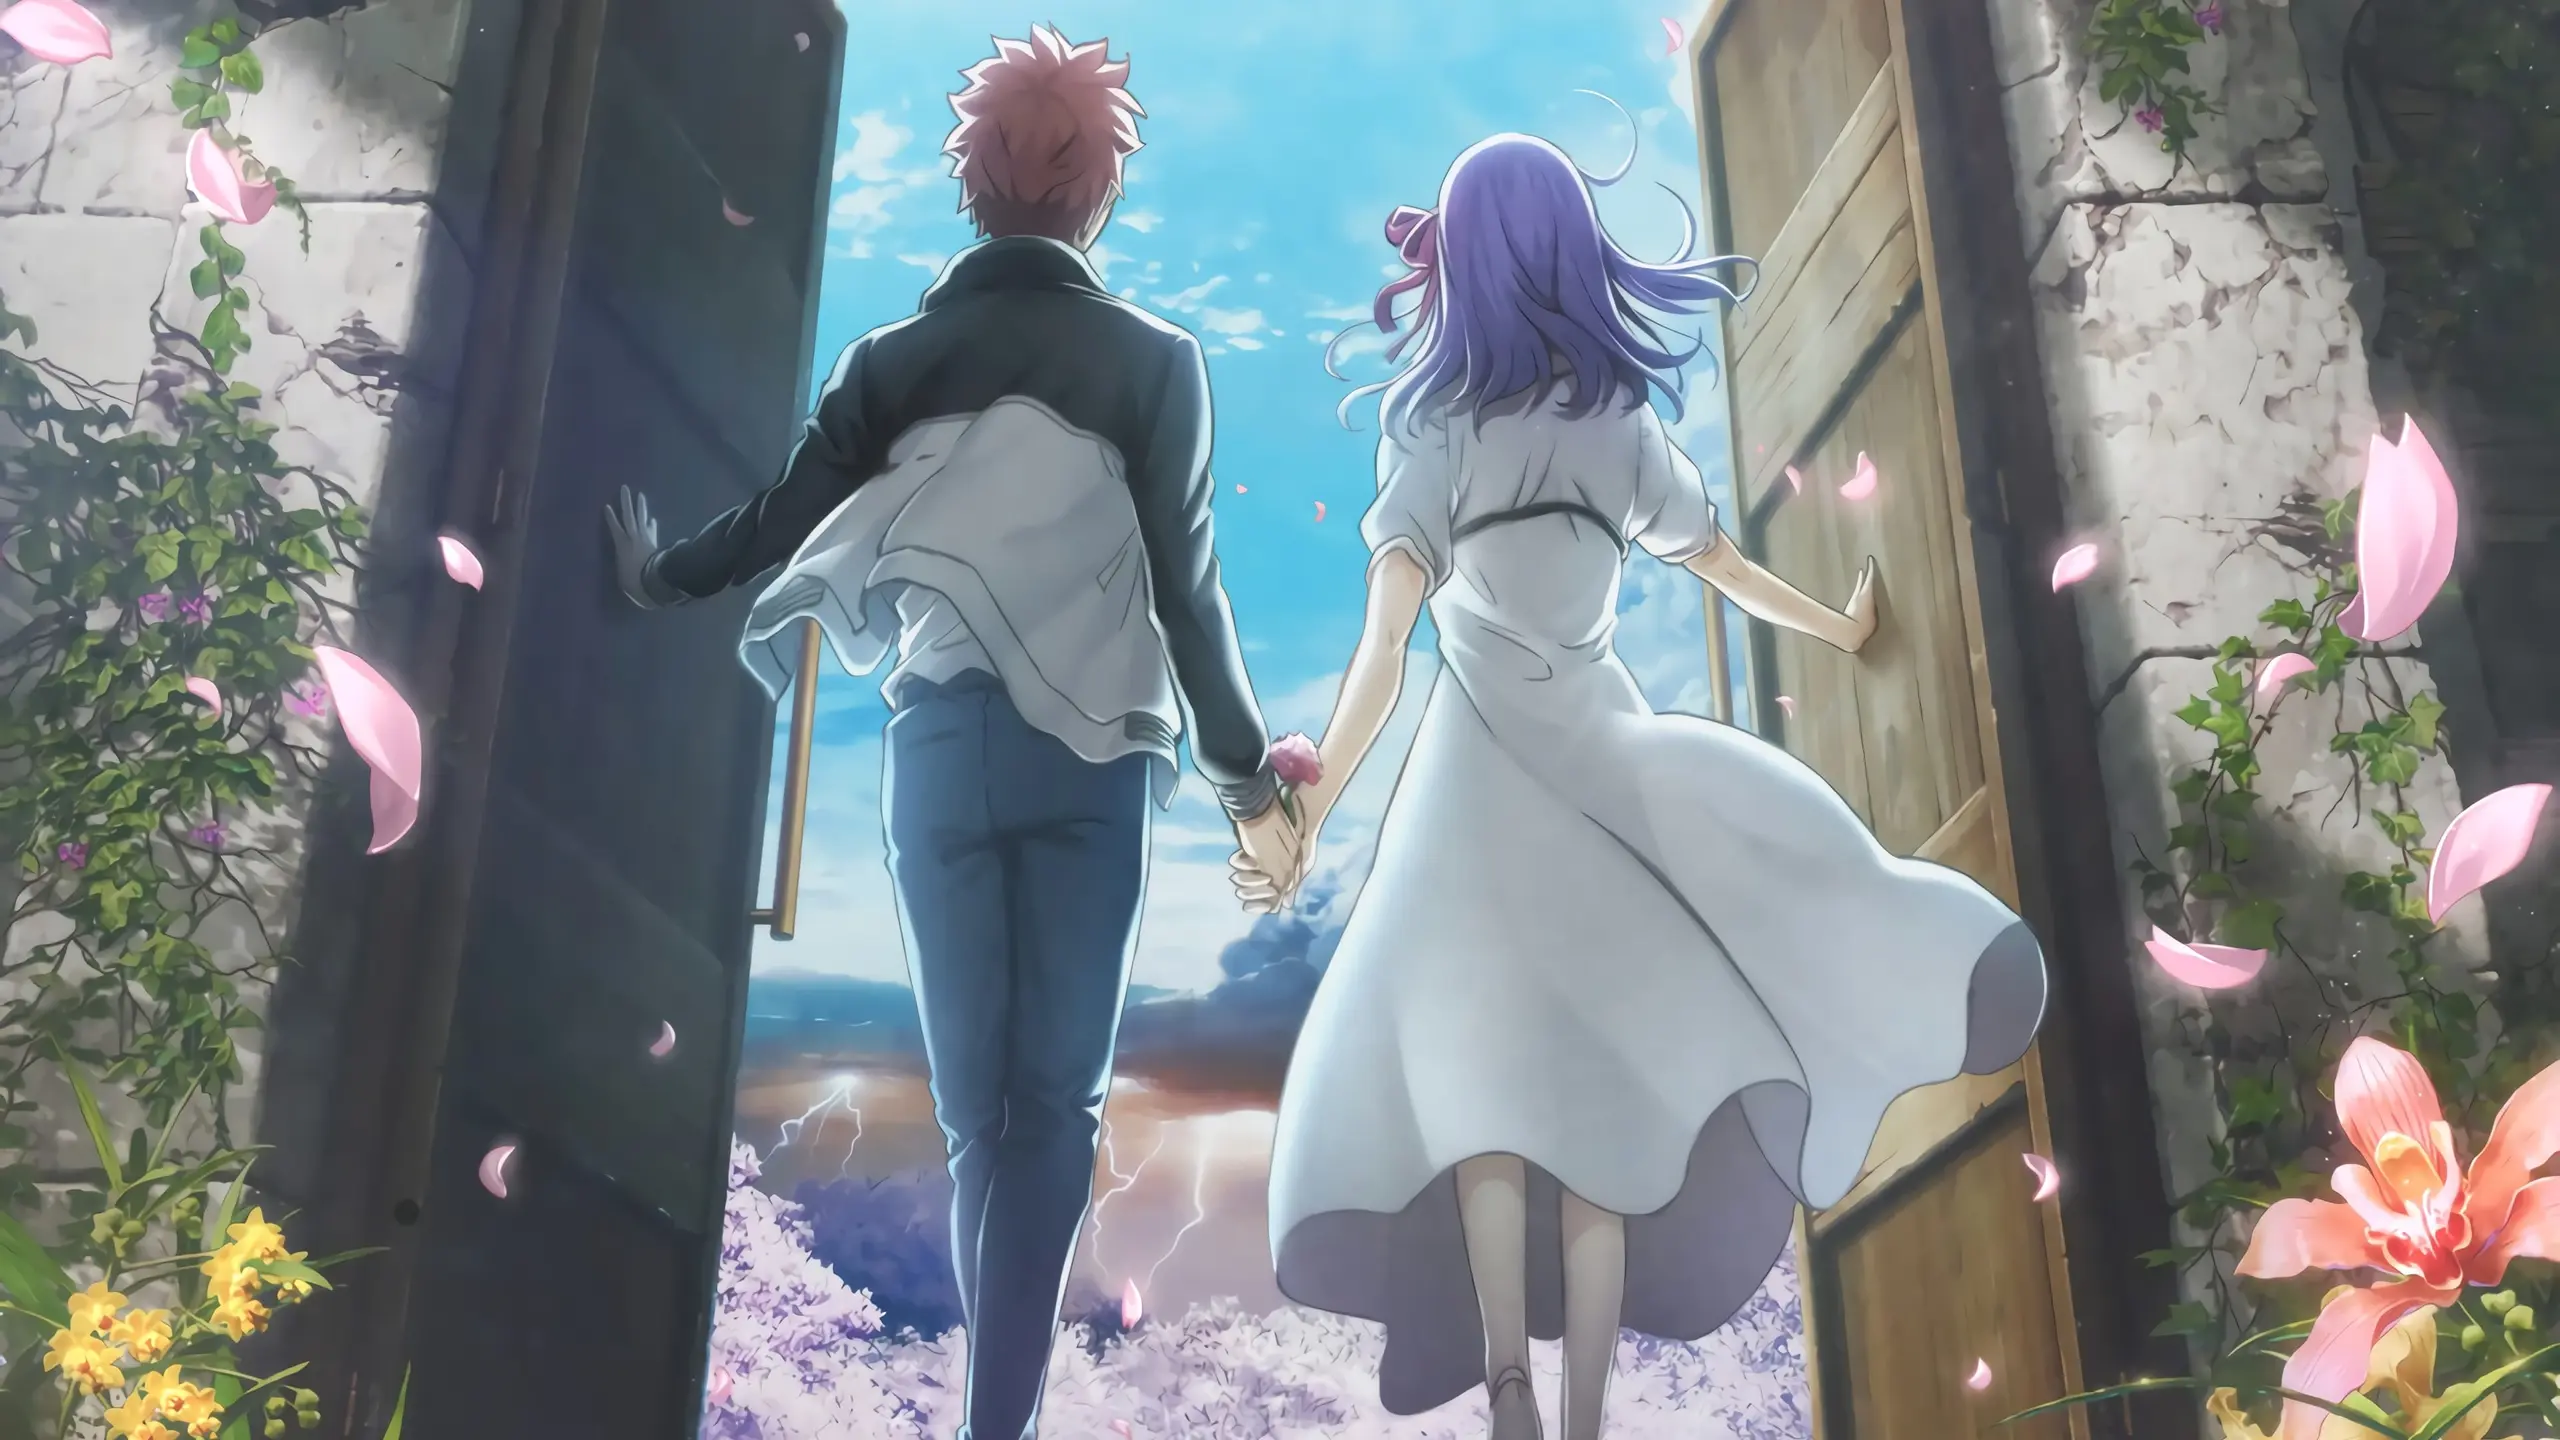 Fate/stay night Heaven's Feel III -Spring Song-